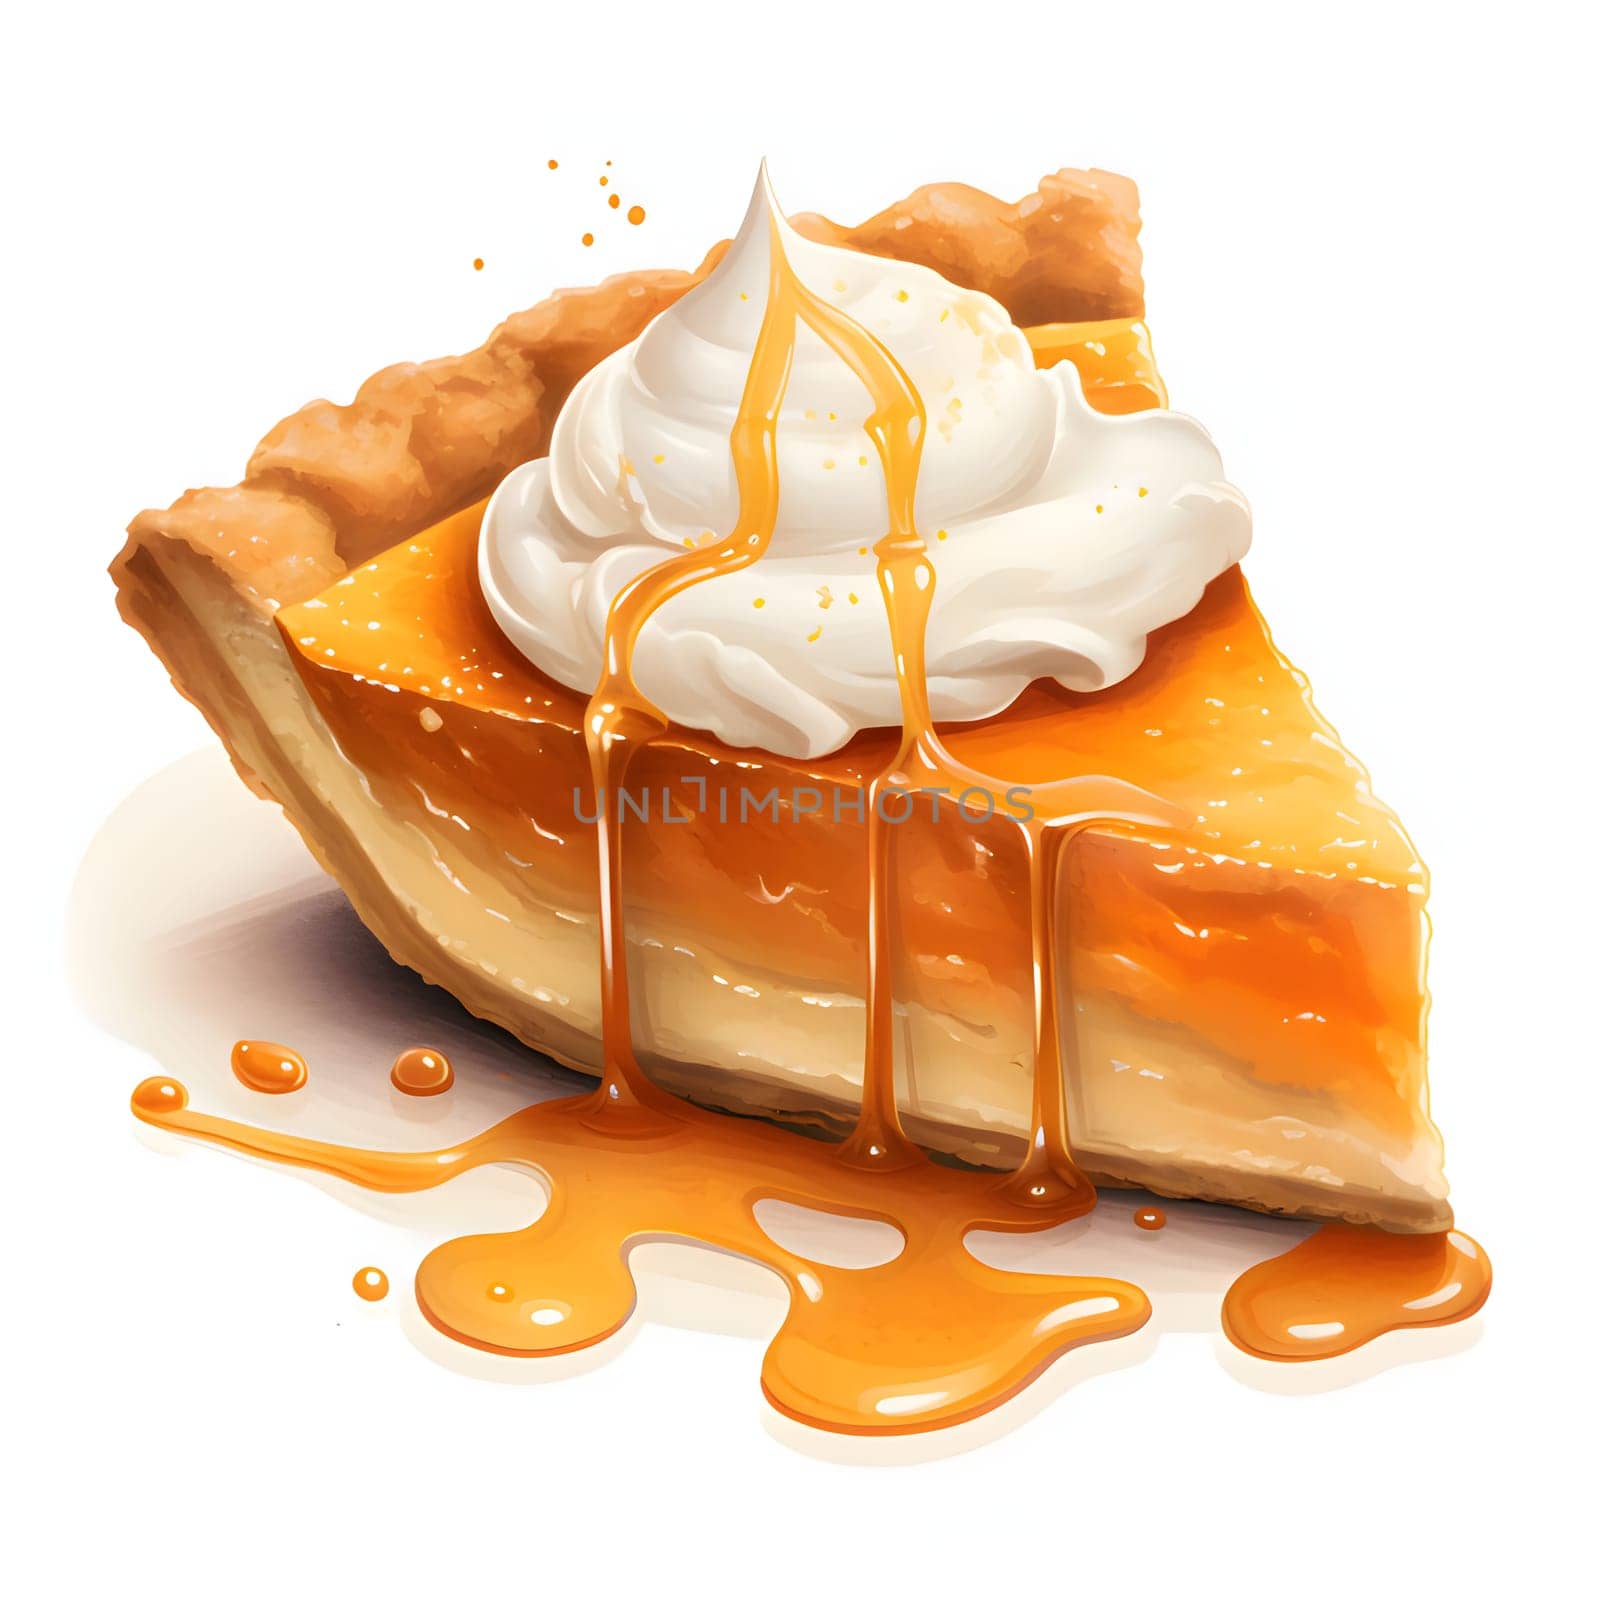 Piece of pumpkin pie with sauce and cream. Pumpkin as a dish of thanksgiving for the harvest, picture on a white isolated background. Atmosphere of joy and celebration.